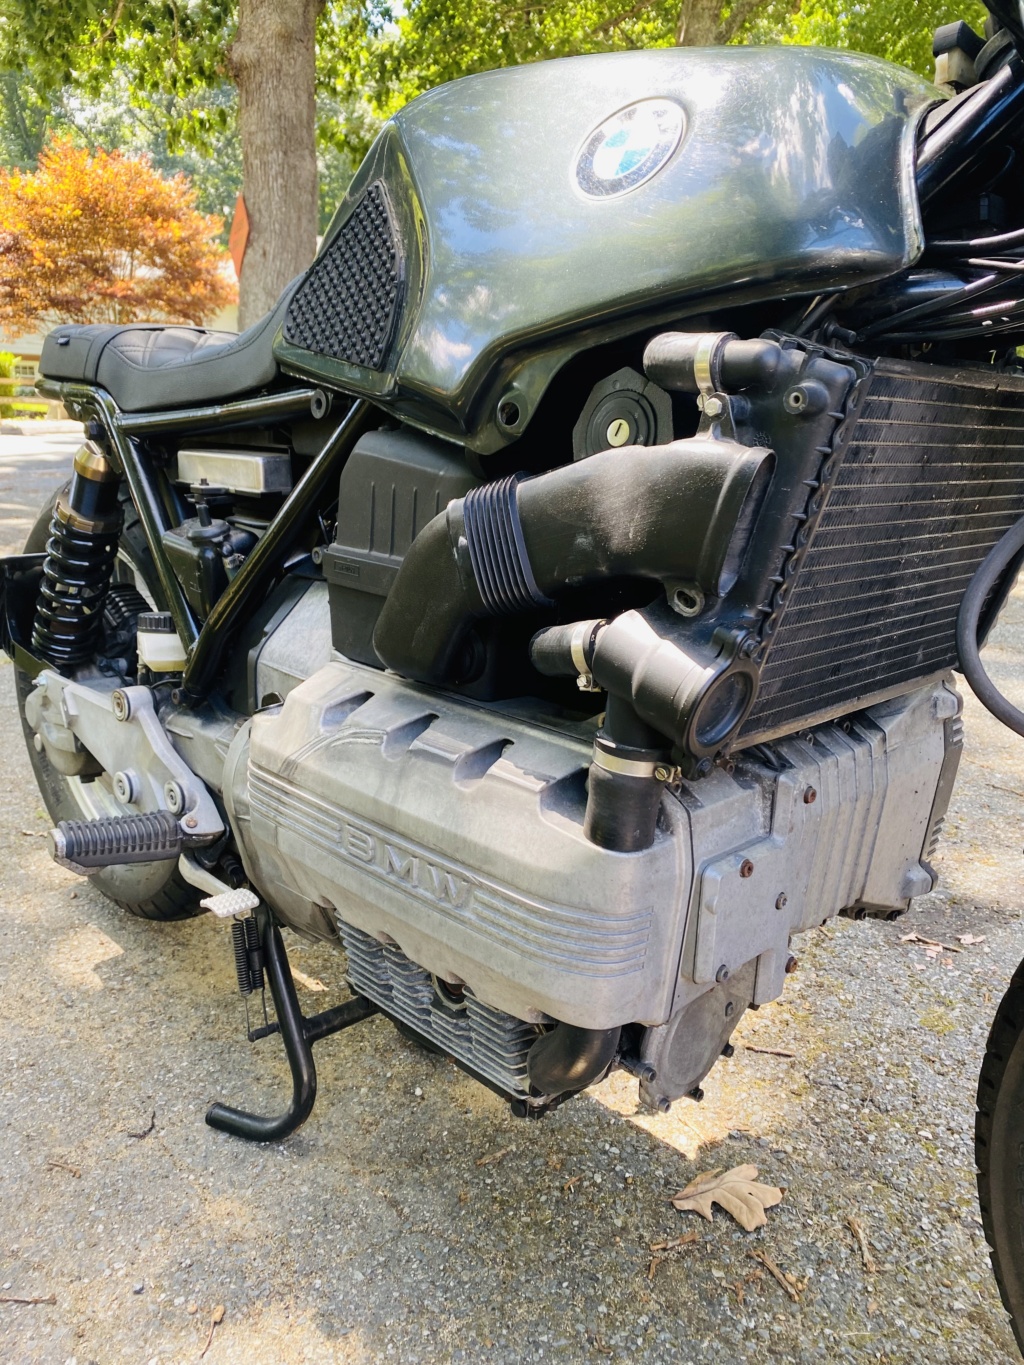 1985 BMW K100 for Sale in New England - $3500 3ebe2e10